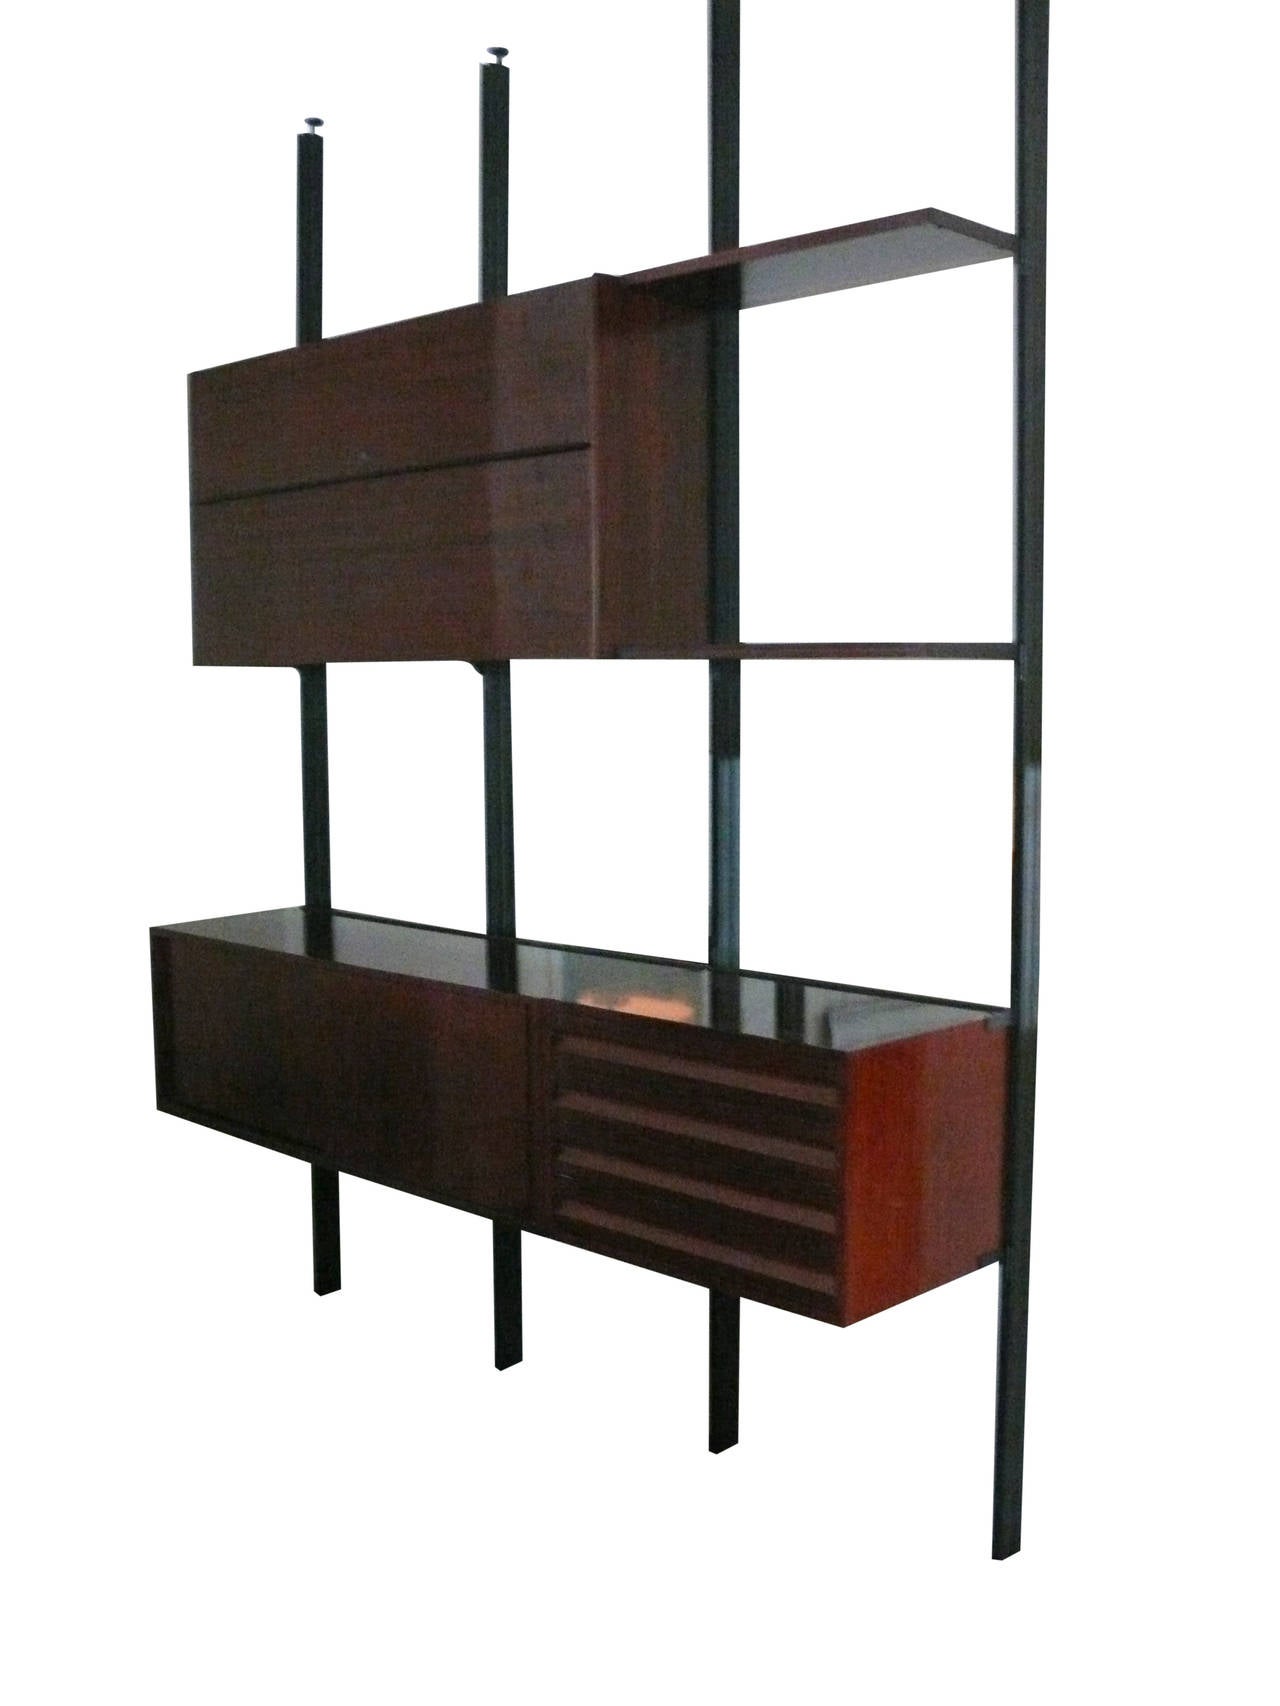 Elegant wall unit or bookcase by Borsani for Techno, Milano. Rosewood has been newly refinished with a hand rubbed polish. The case features four vertical steel columns which hold the interchangeable wood pieces. The upper unit consists of a cabinet